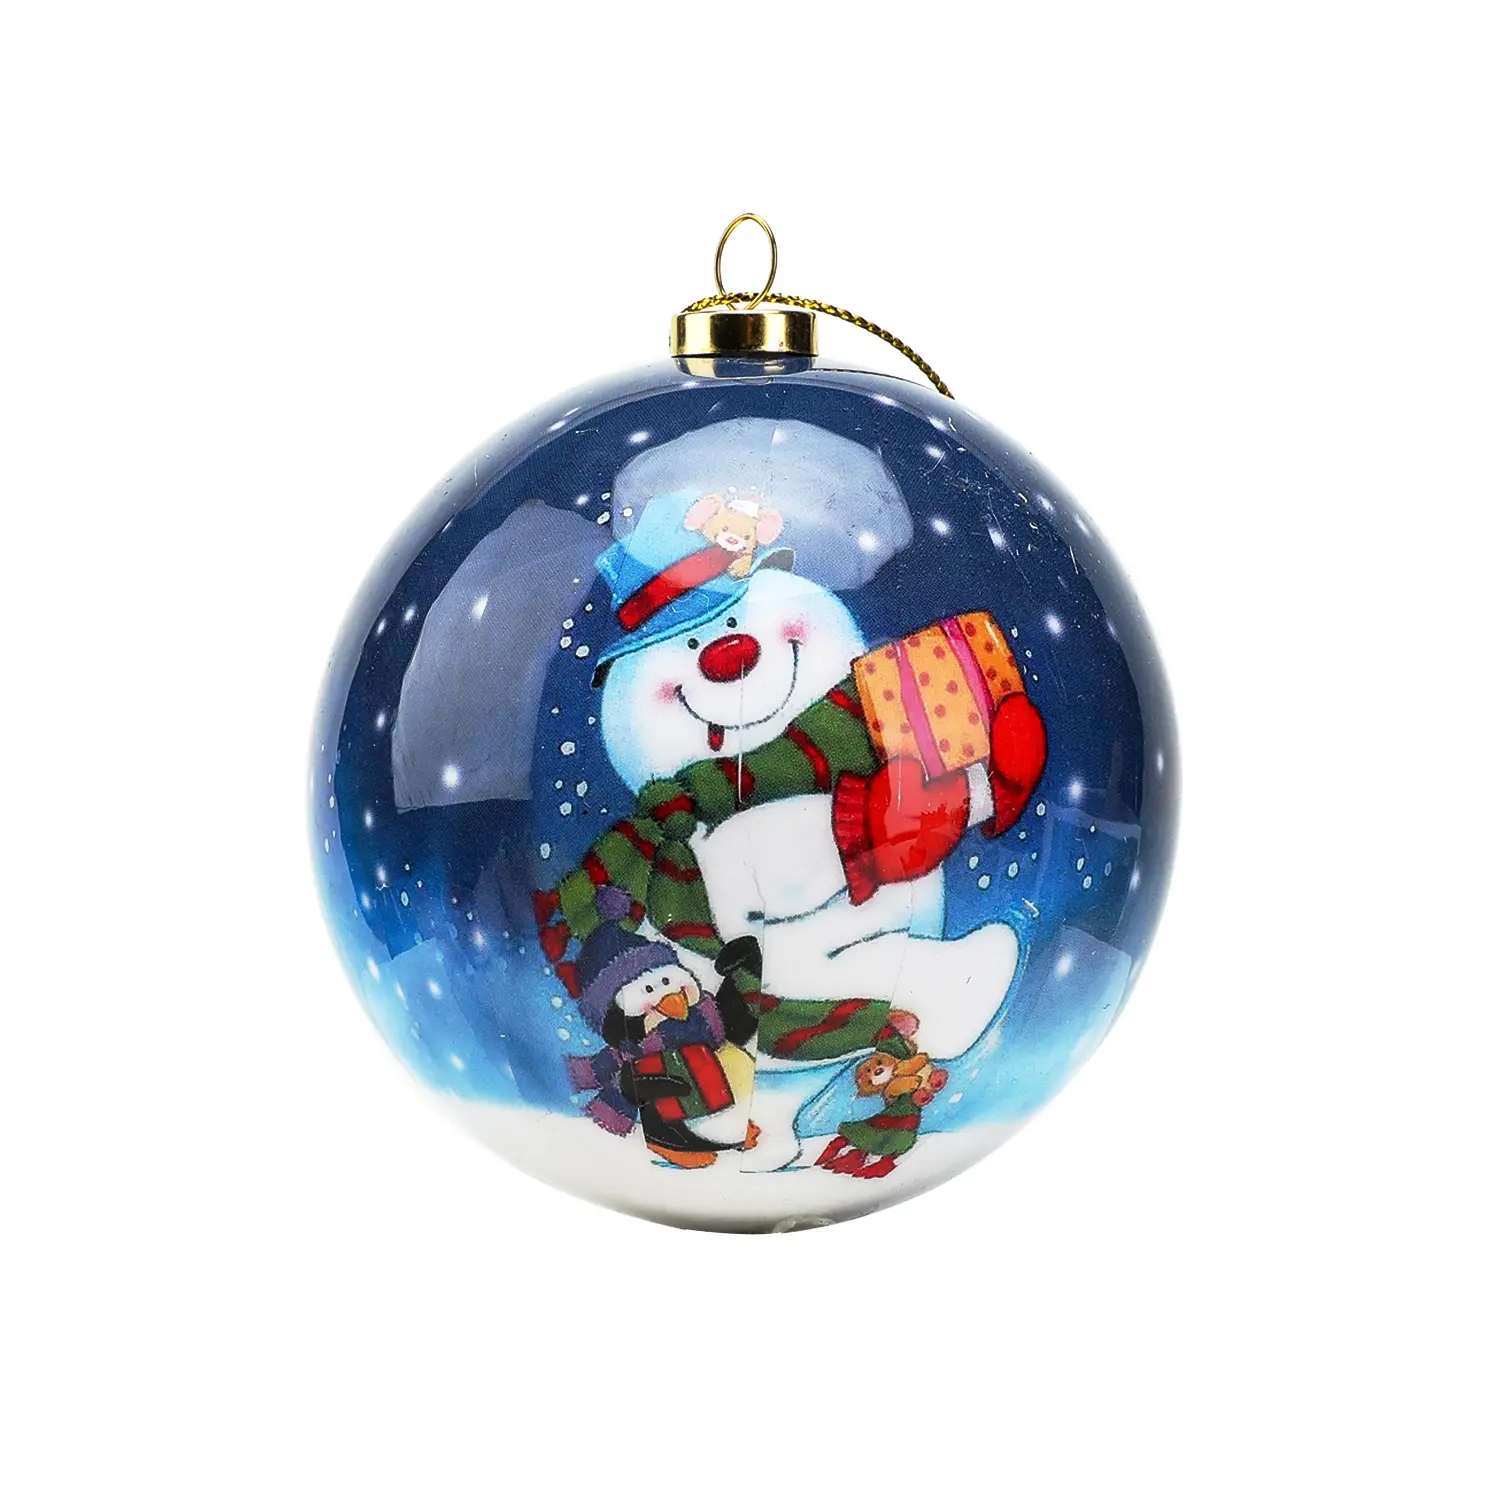 Wholesale Custom Christmas Hanging Decor Bauble High Quality 8cm round Ceramic Ball ornaments Foam Material Tree Decorations